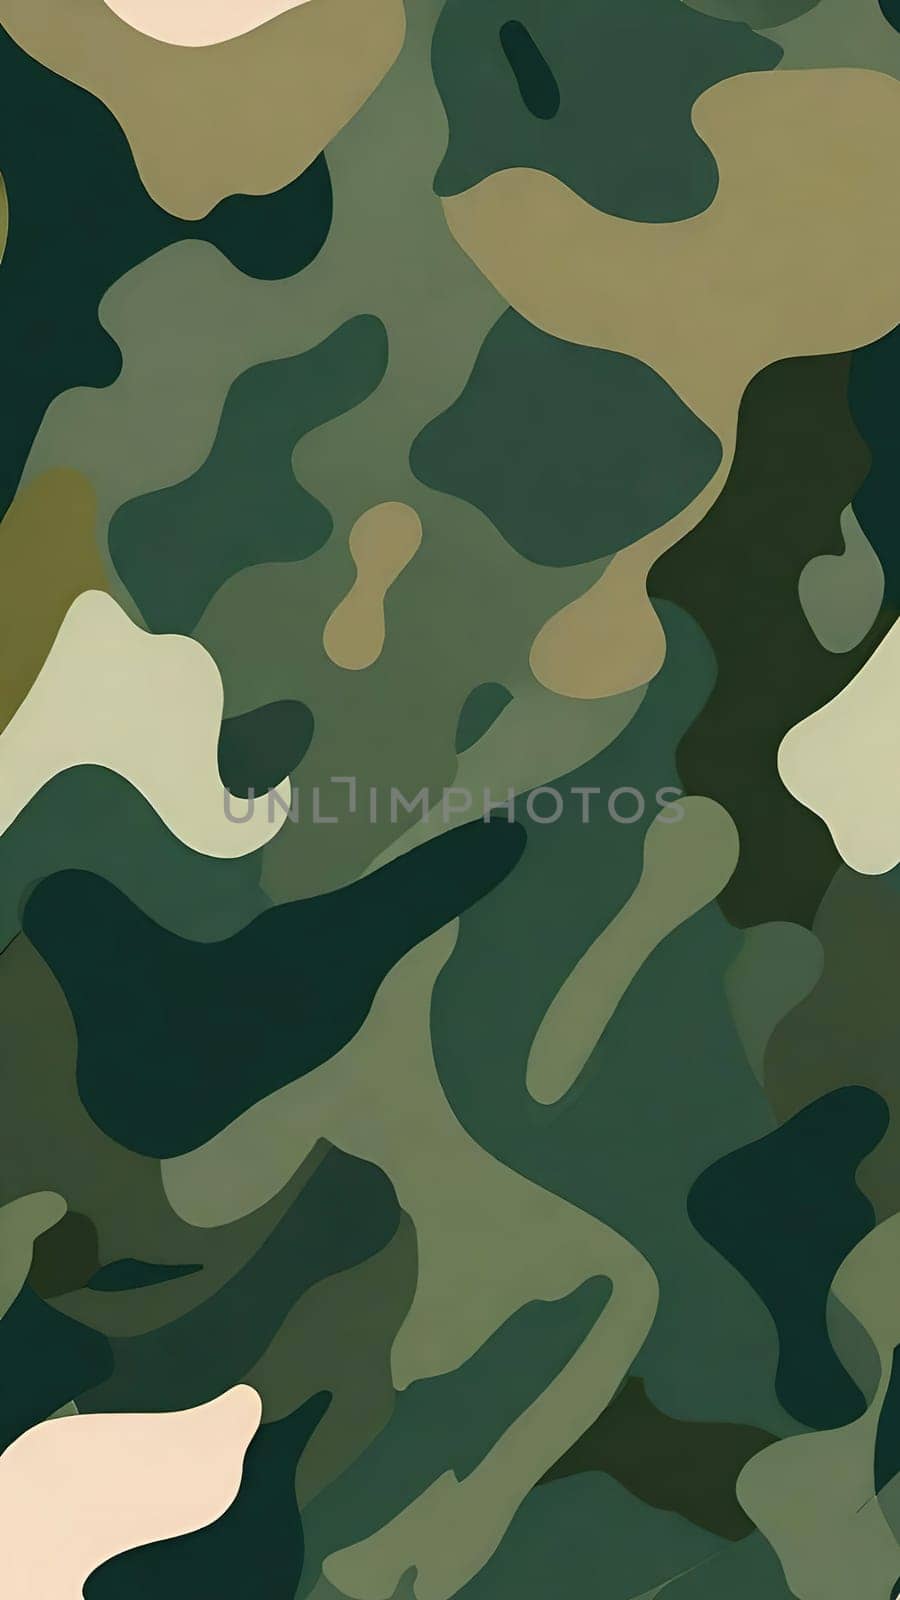 Camouflage Seamless Pattern. Classic clothing style masking camo repeat print. Green, brown, black colors. Vector illustration.Classic clothing style masking camo repeat print.